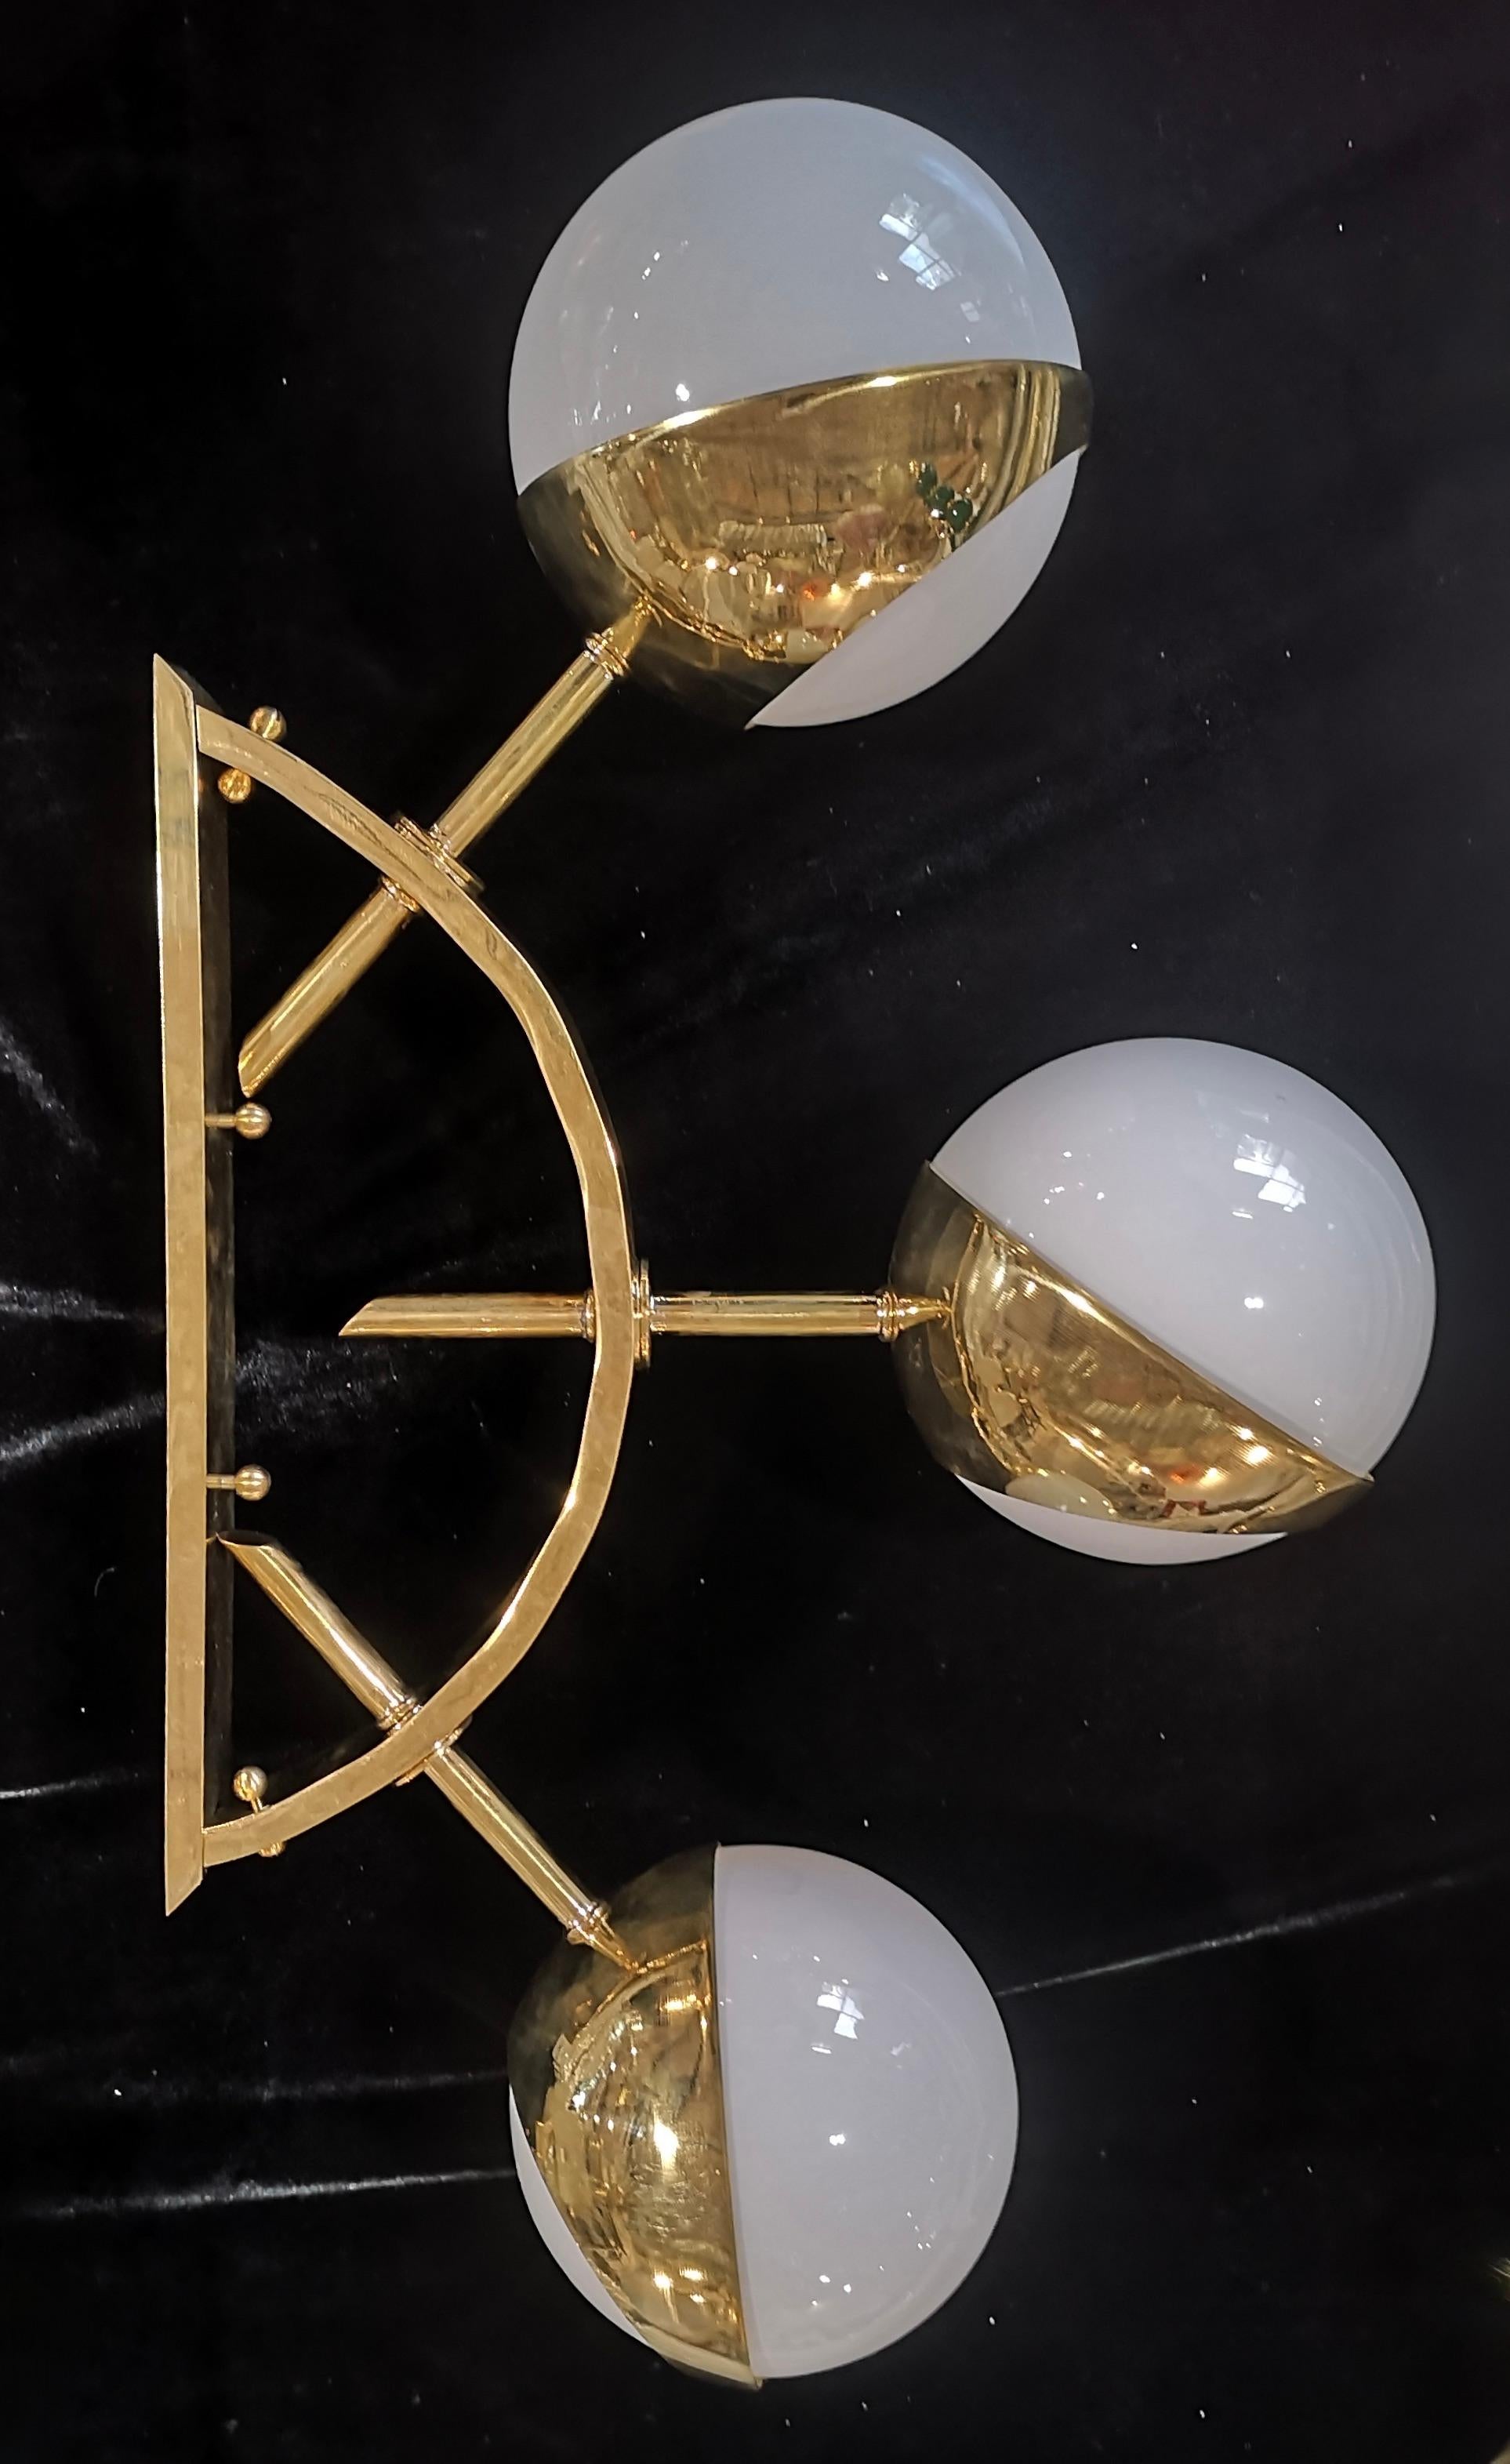 Unsurpassed design for this applique that features a triptych of lights along a beautiful brass arch. Unsurpassed Murano Design.

The wall lamp is composed of a very particular brass structure in the shape of an arch; brass arch from which three